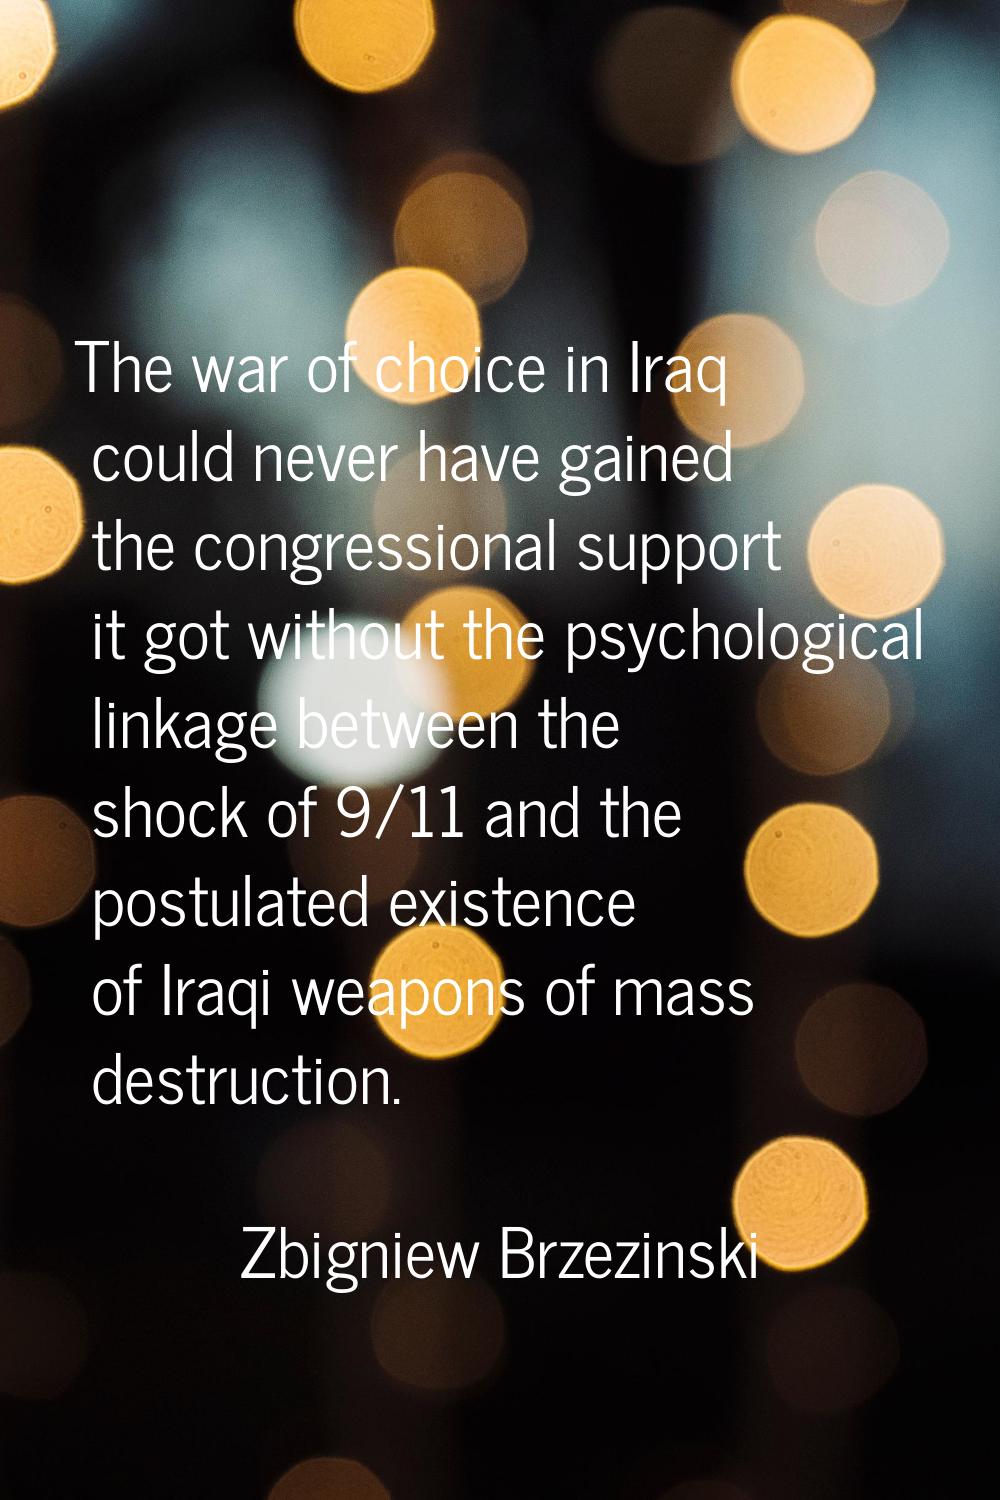 The war of choice in Iraq could never have gained the congressional support it got without the psyc